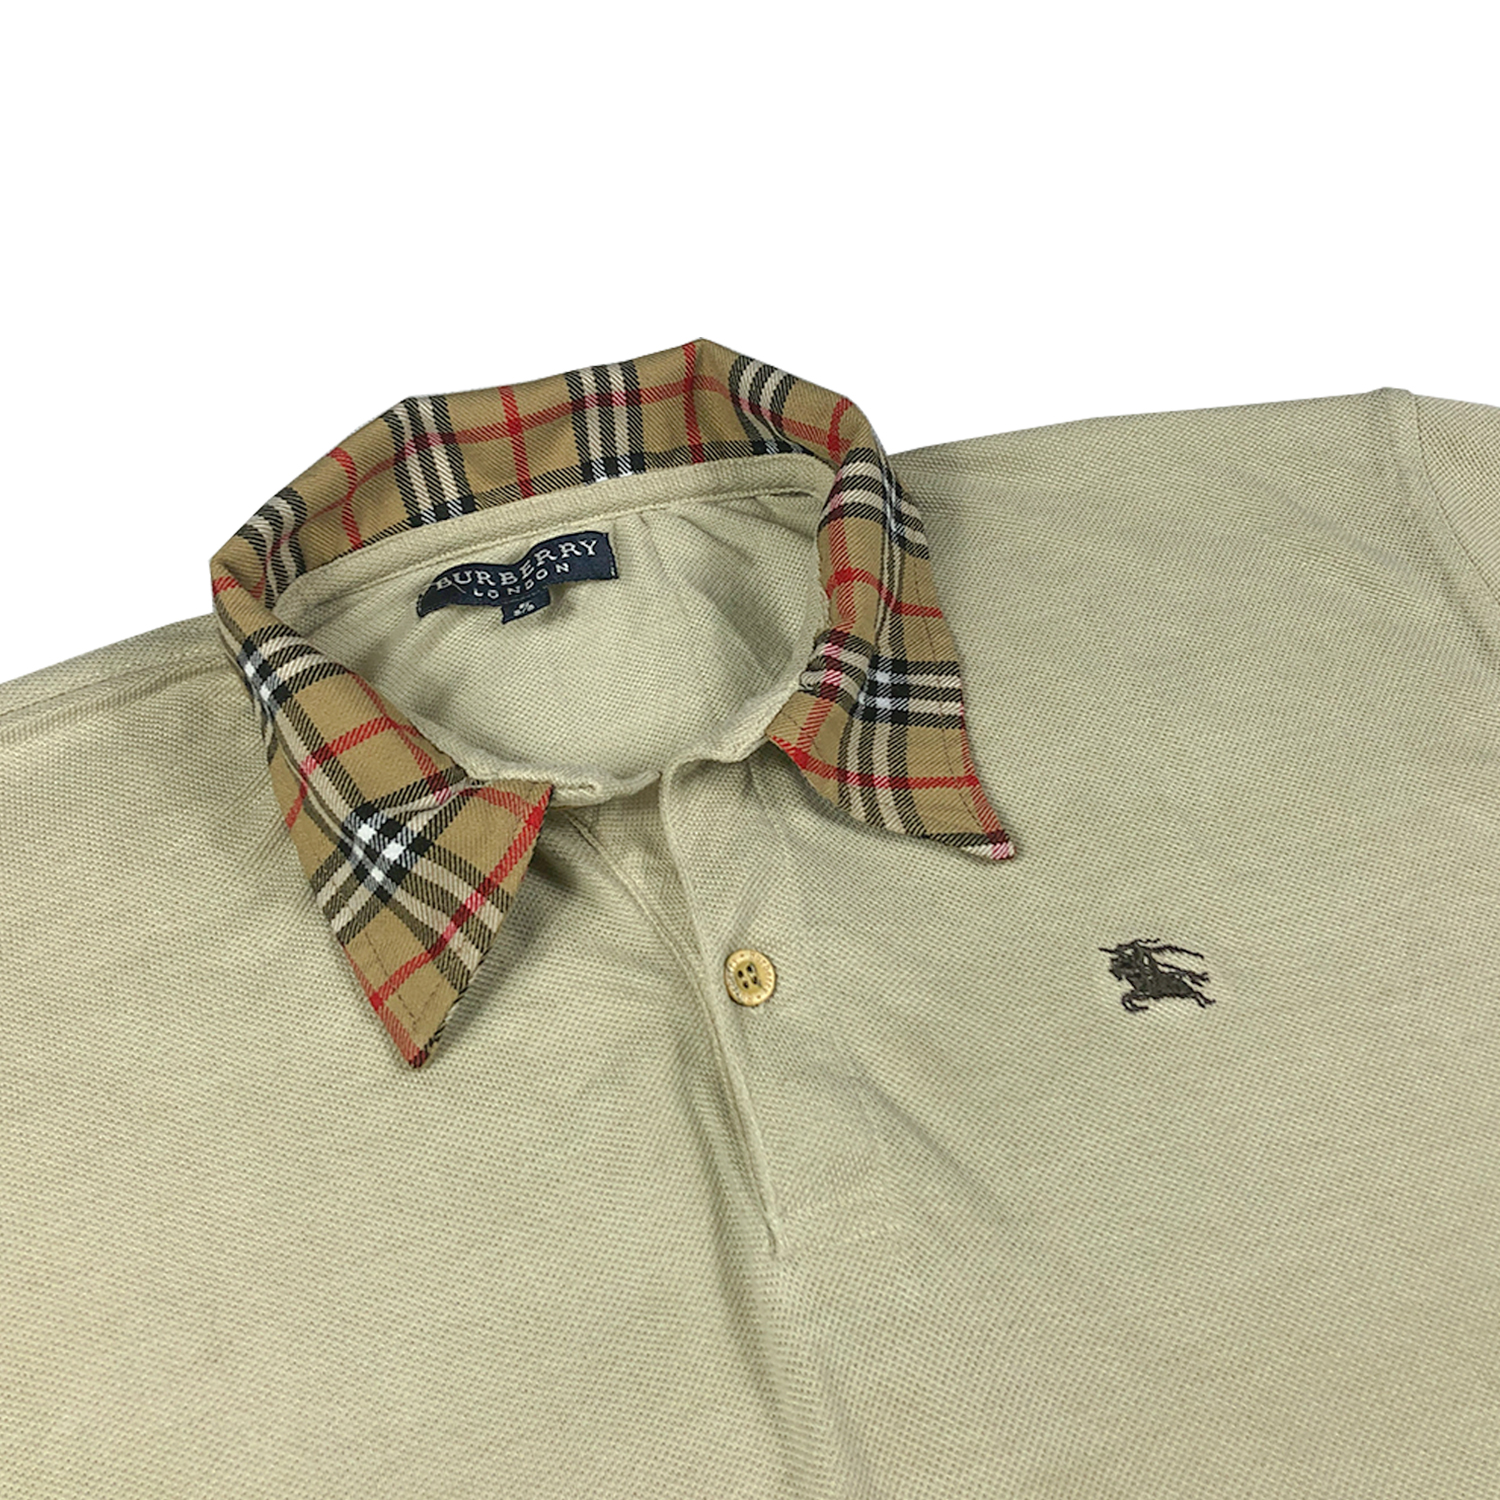 Arriba 63+ imagen how to tell if a burberry polo is real - Abzlocal.mx